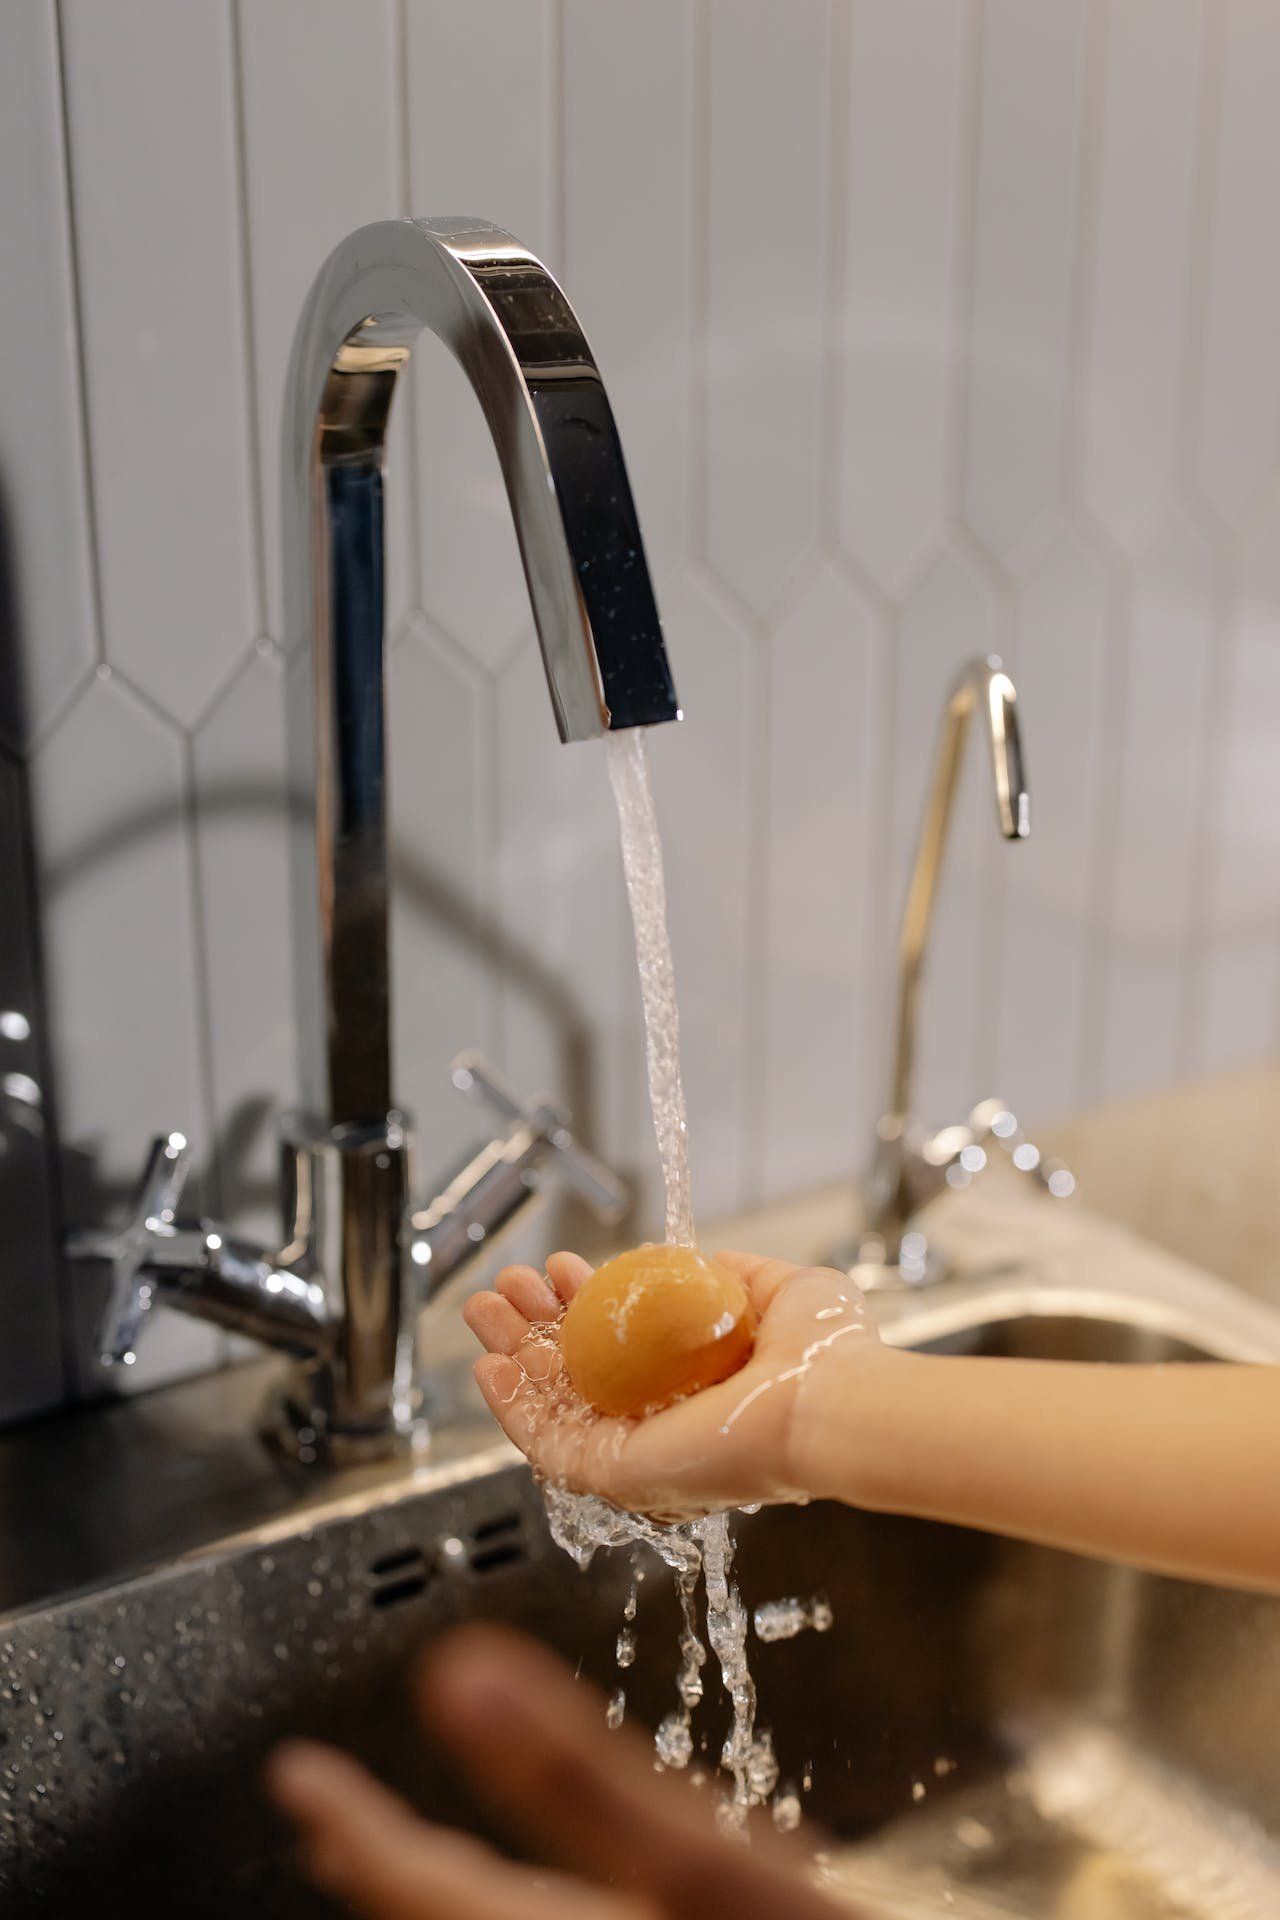 A person is washing their hands in a kitchen sink.